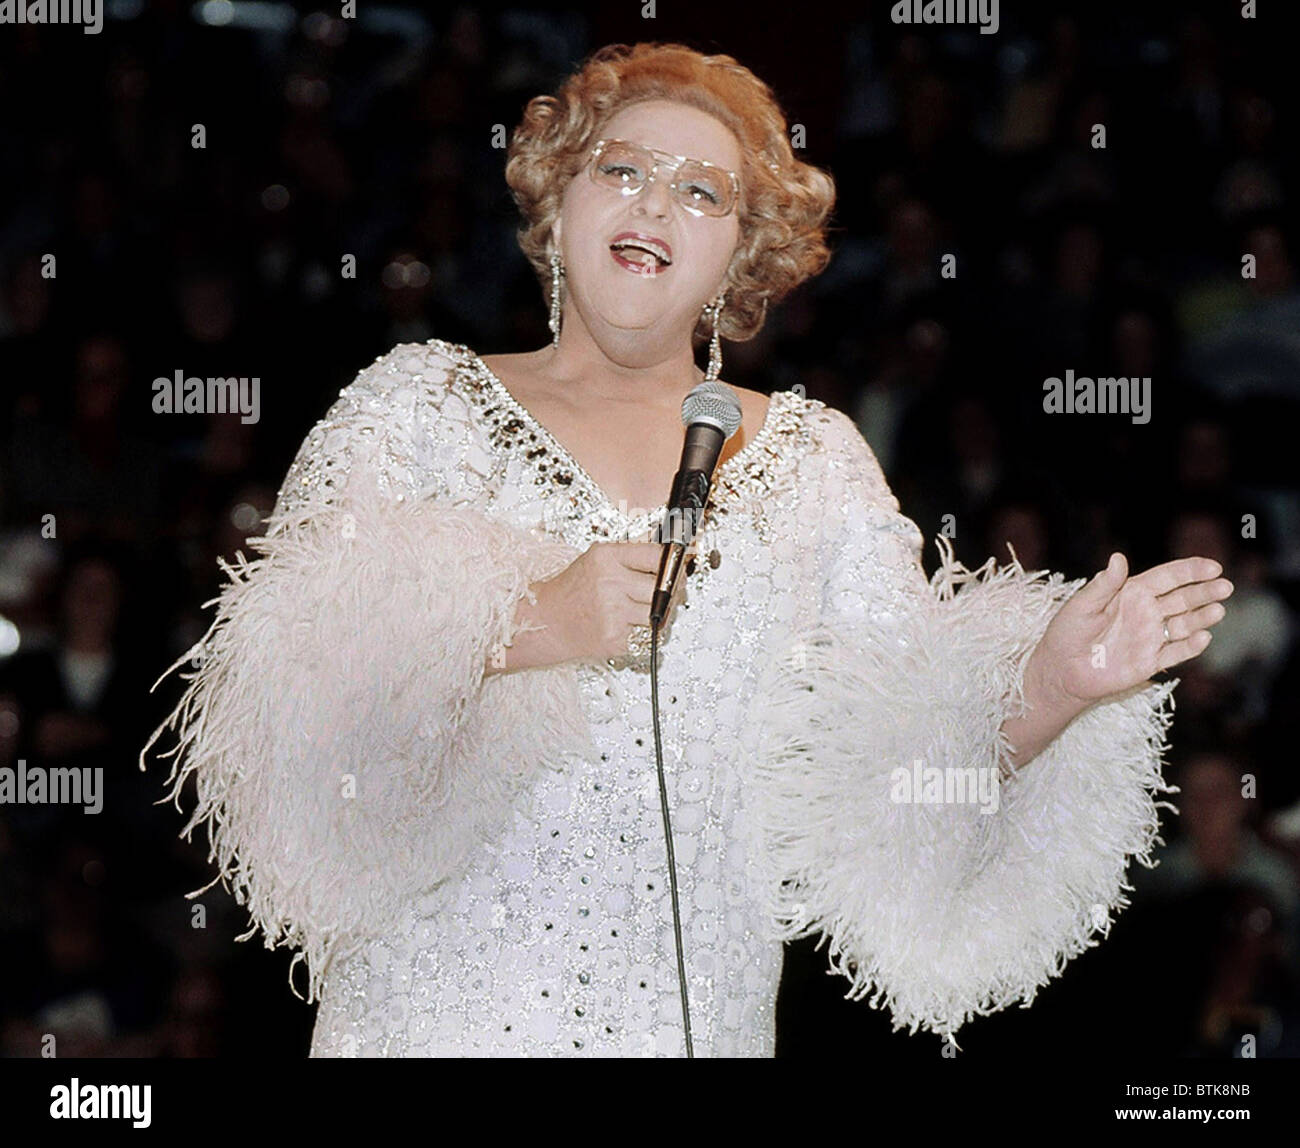 Kate Smith High Resolution Stock Photography and Images - Alamy